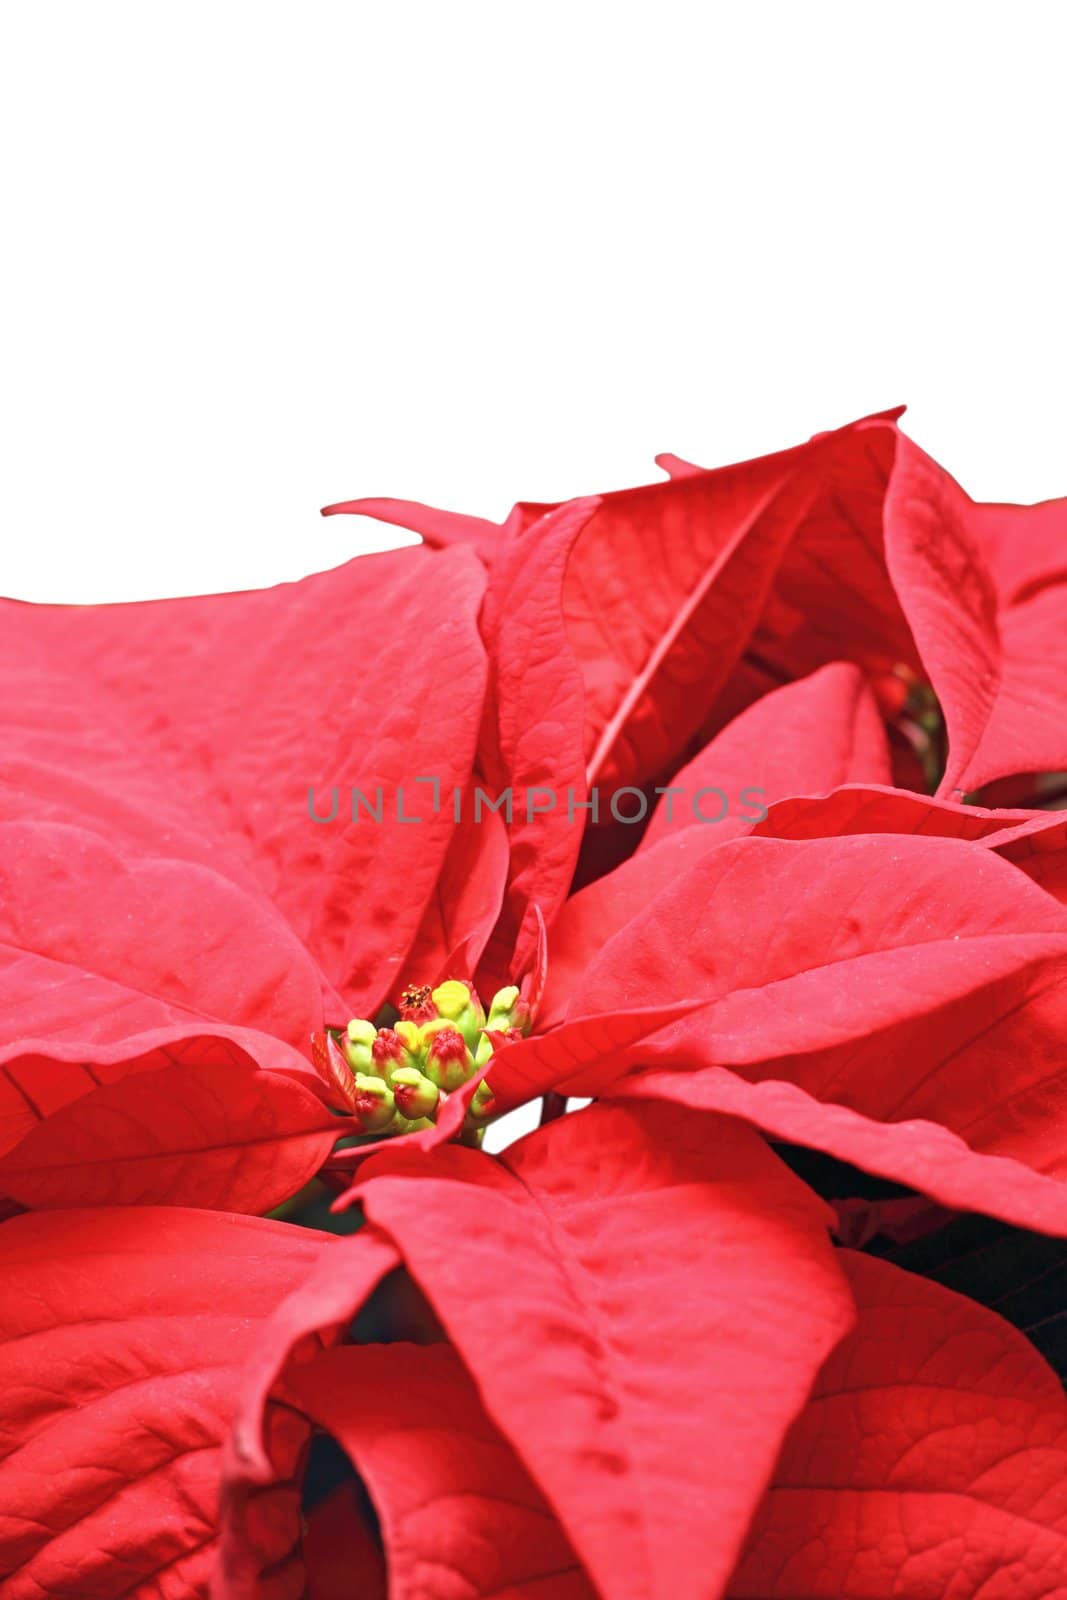 detail of a beautiful red poinsettia flower over white